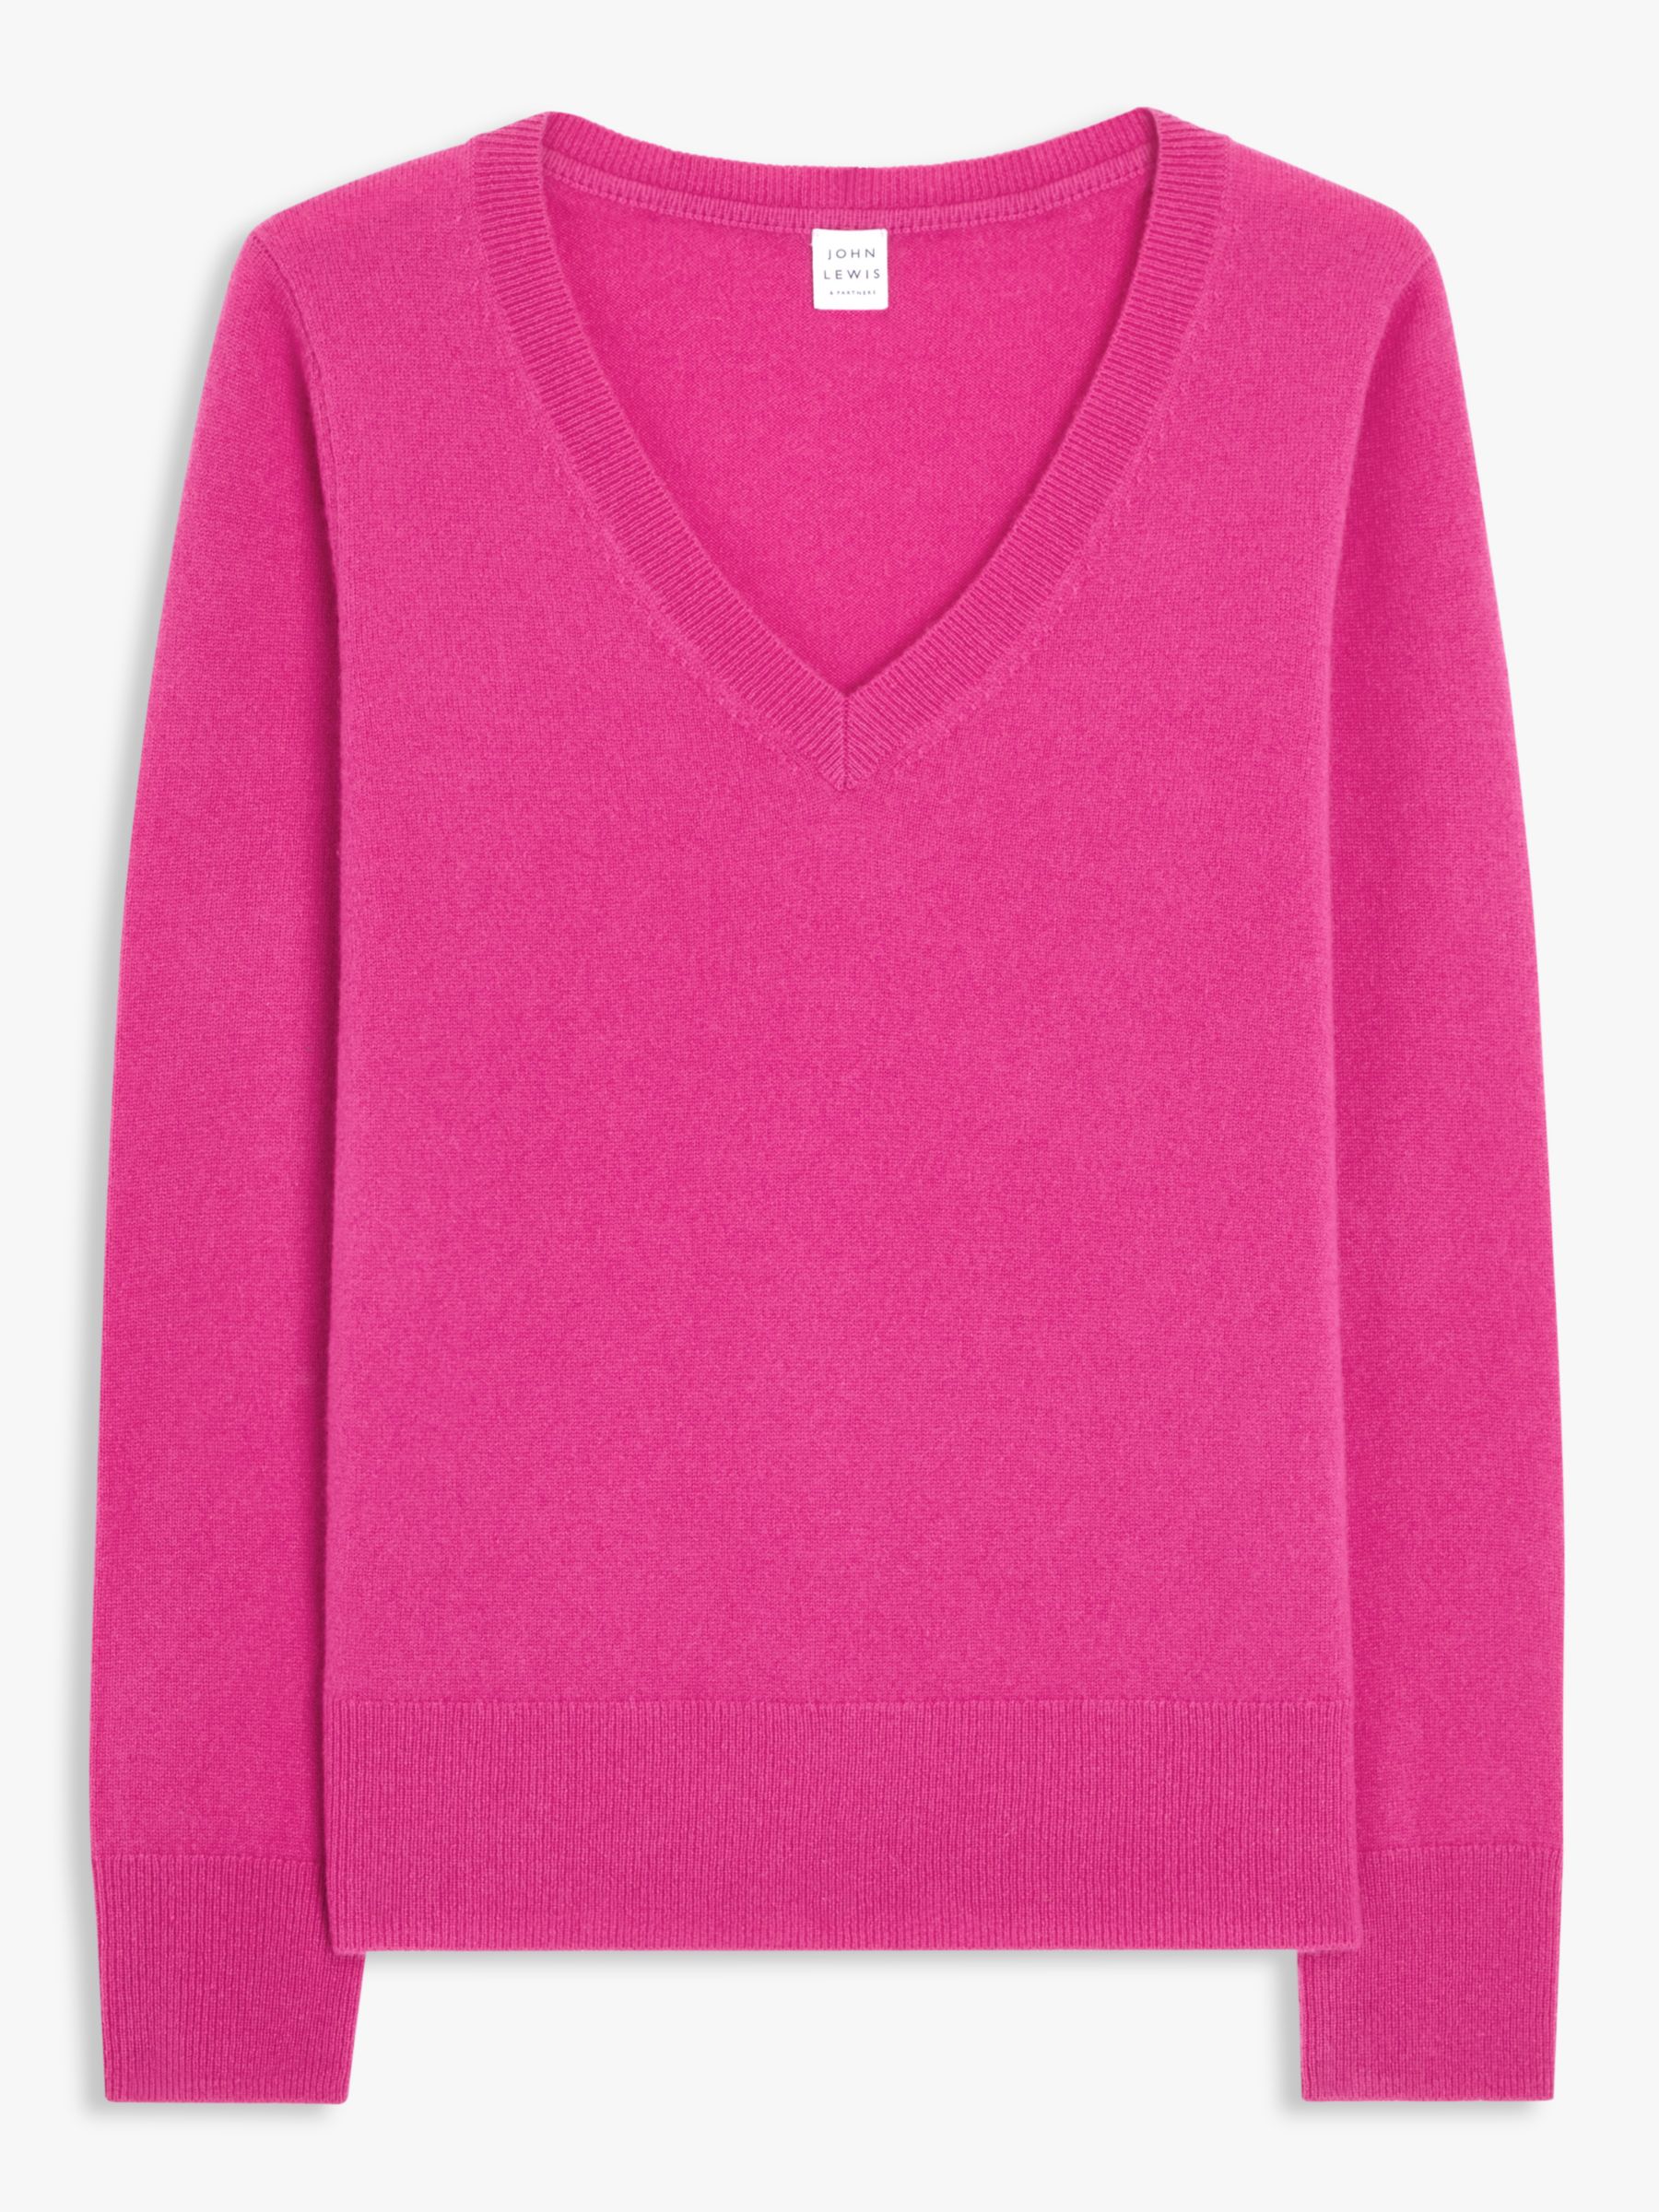 John Lewis Authenticated Cashmere Knitwear